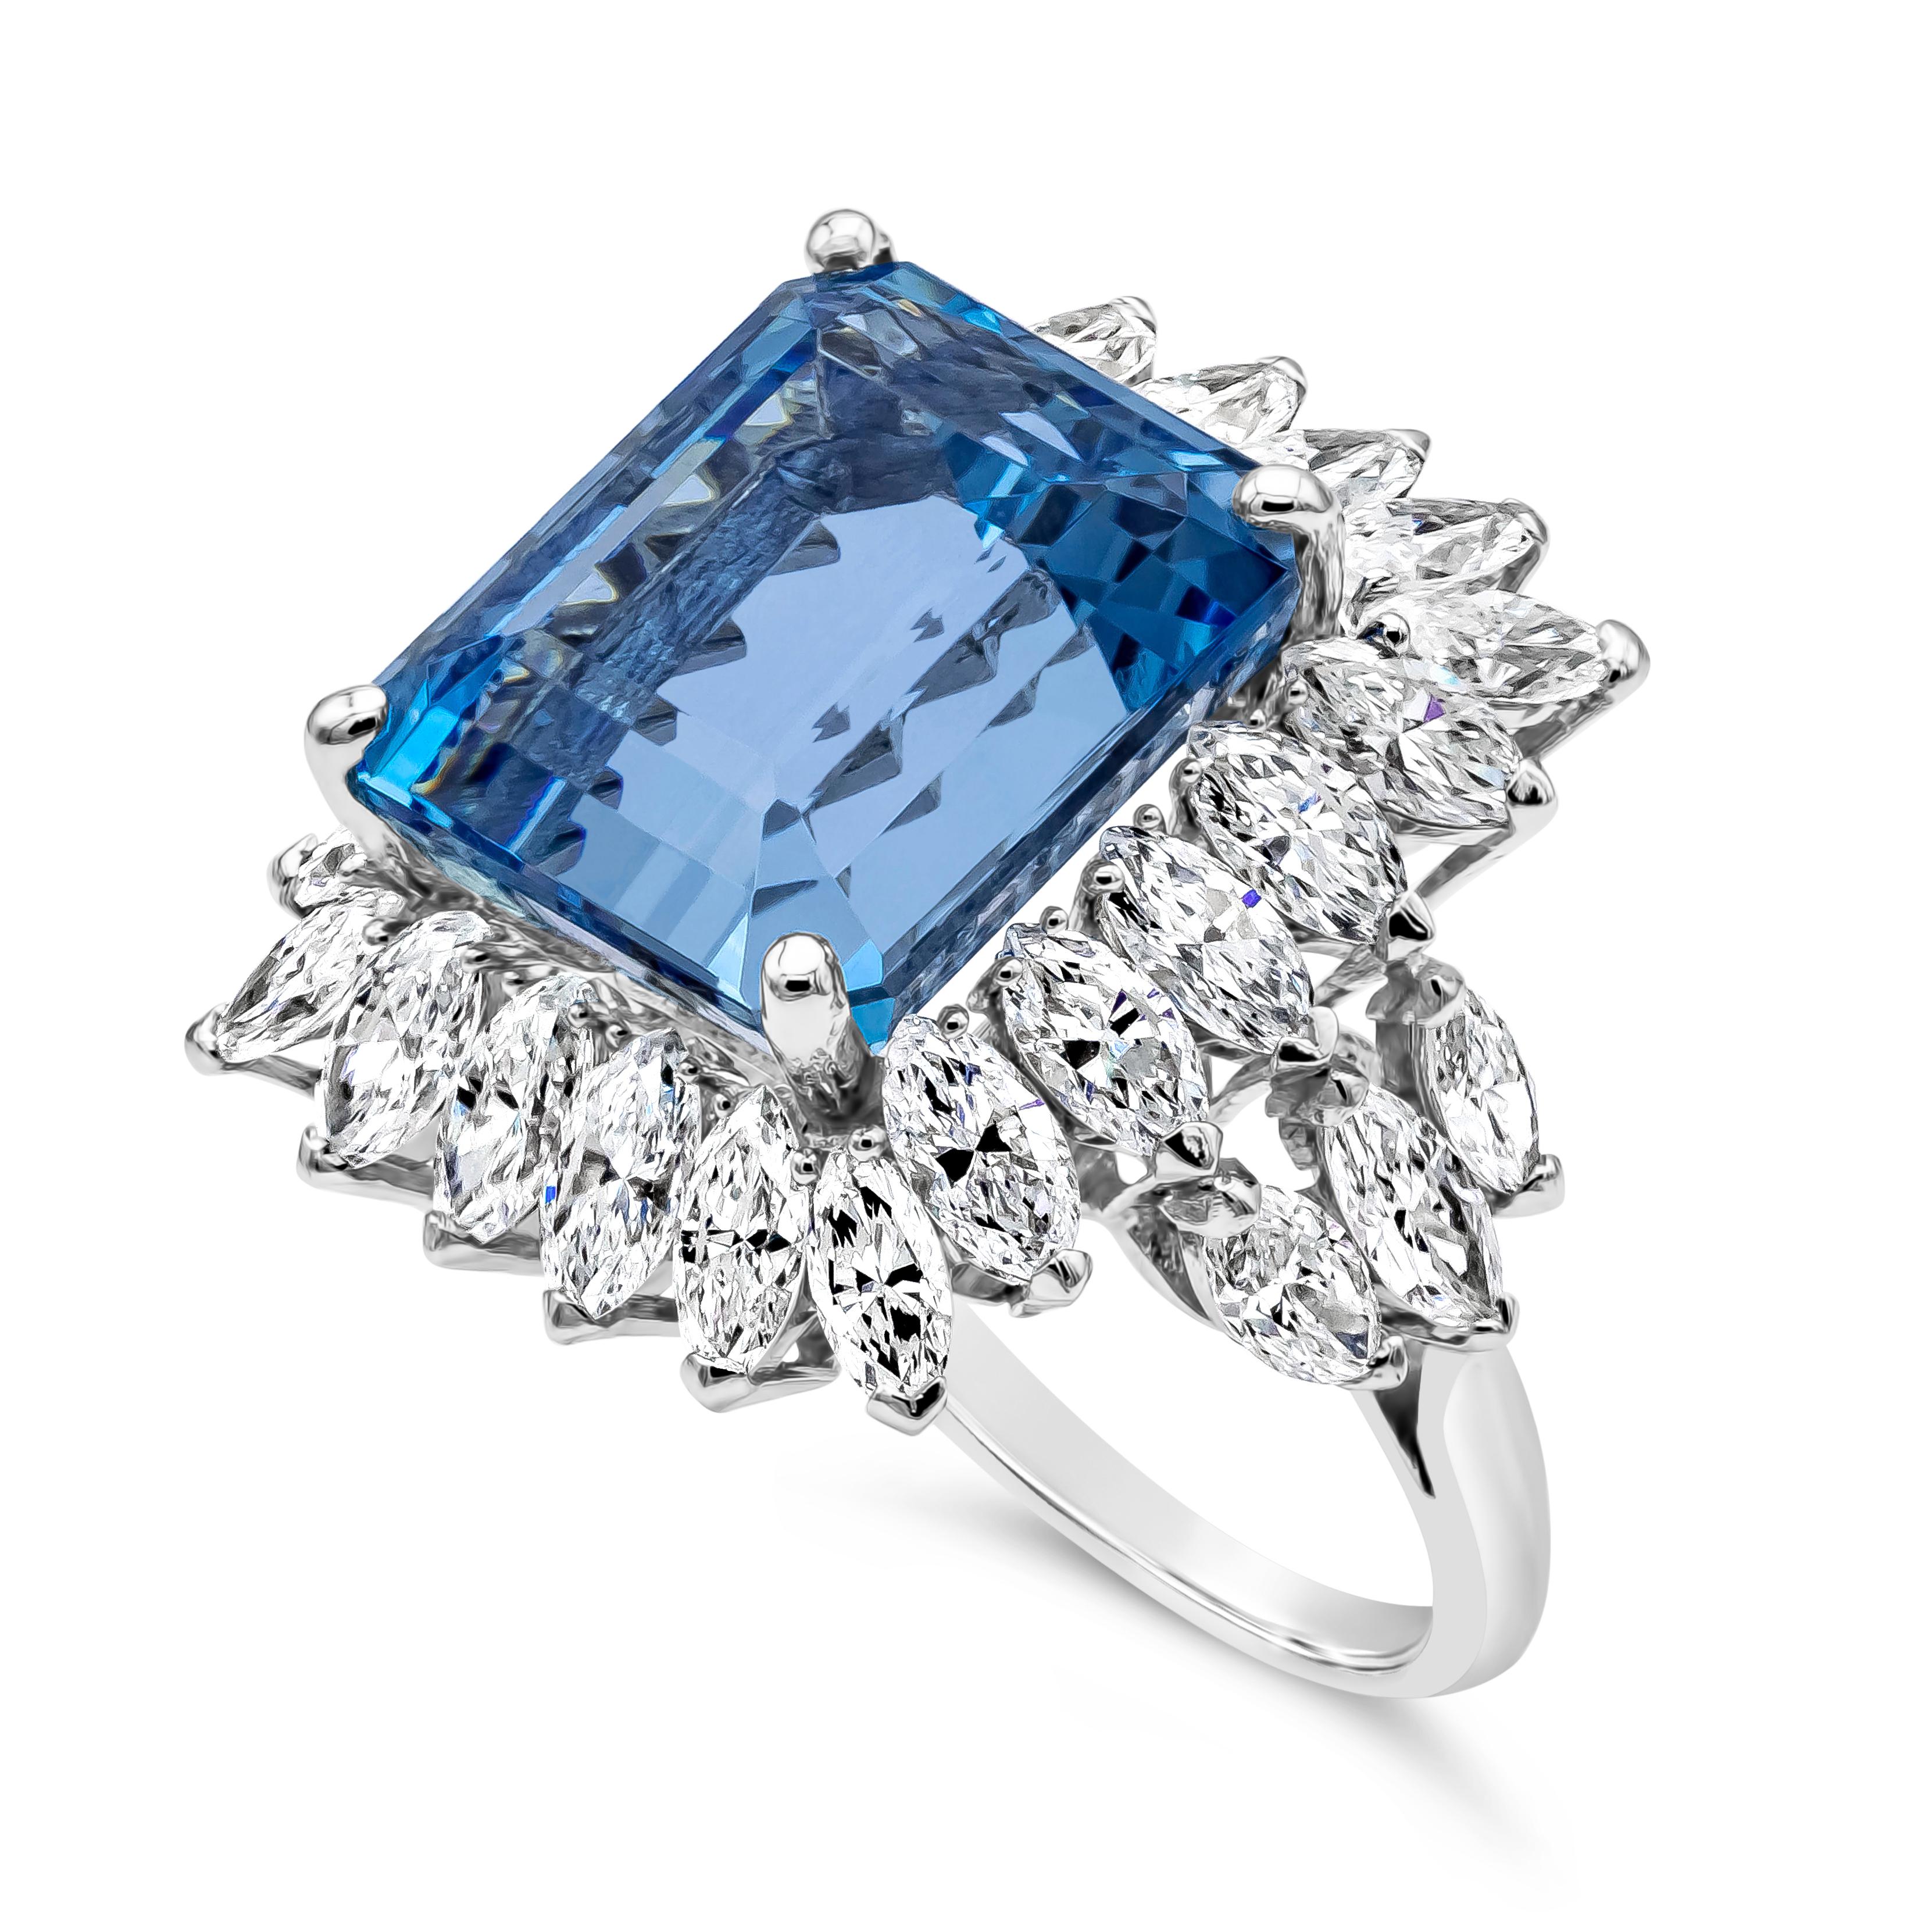 Roman Malakov 11.48 Carat Emerald Cut Aquamarine with Diamond Halo Cocktail Ring In New Condition For Sale In New York, NY